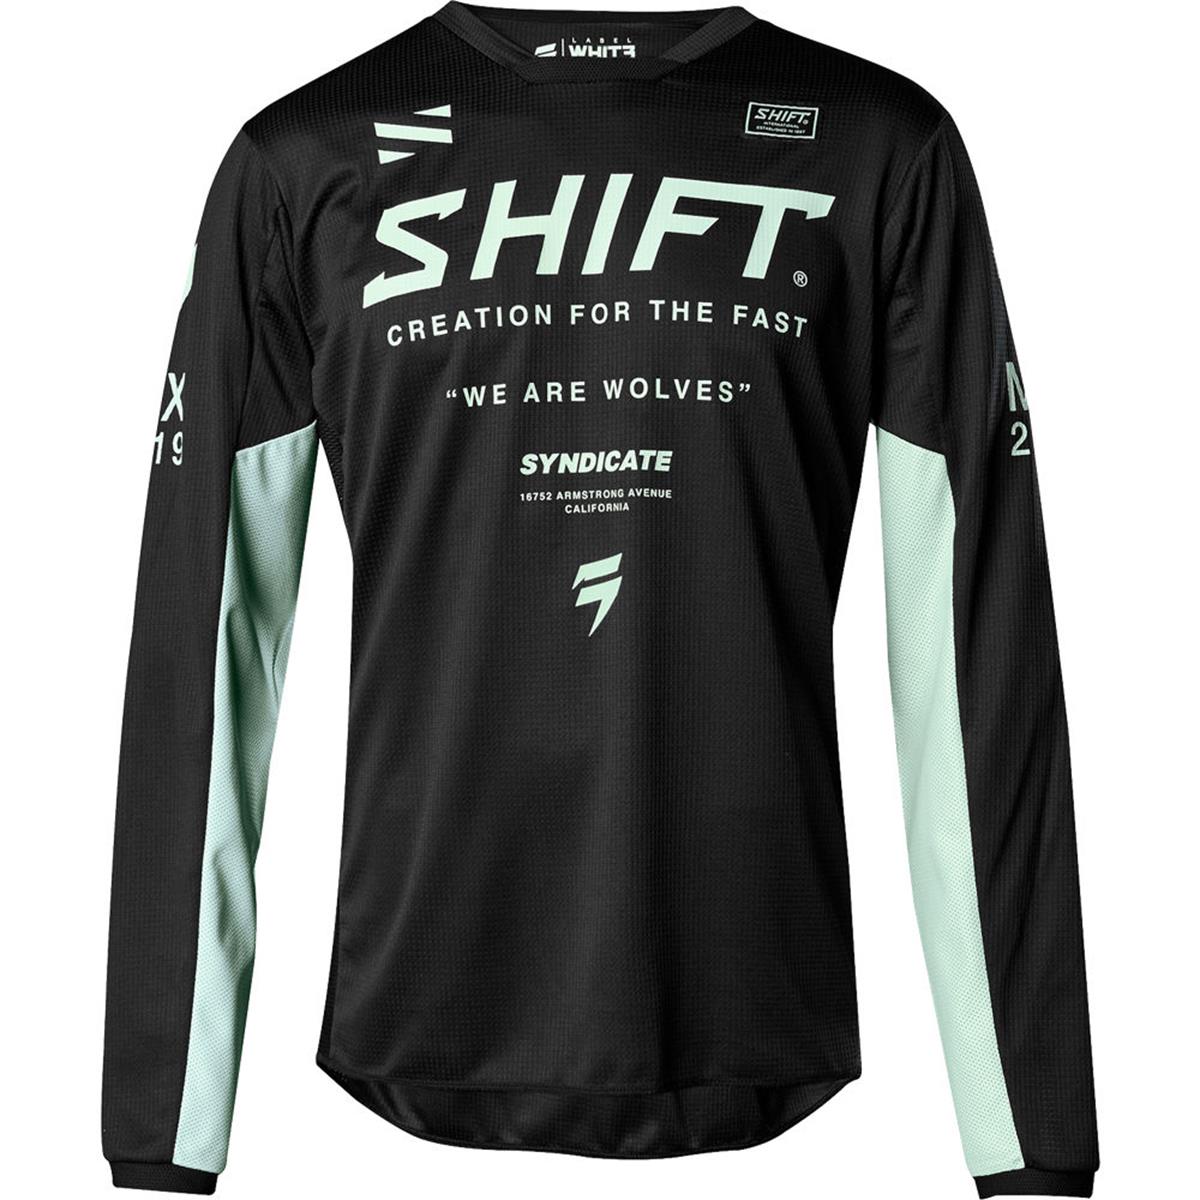 Shift Jersey Whit3 Label Iceland Black/Mint - Limited Edition